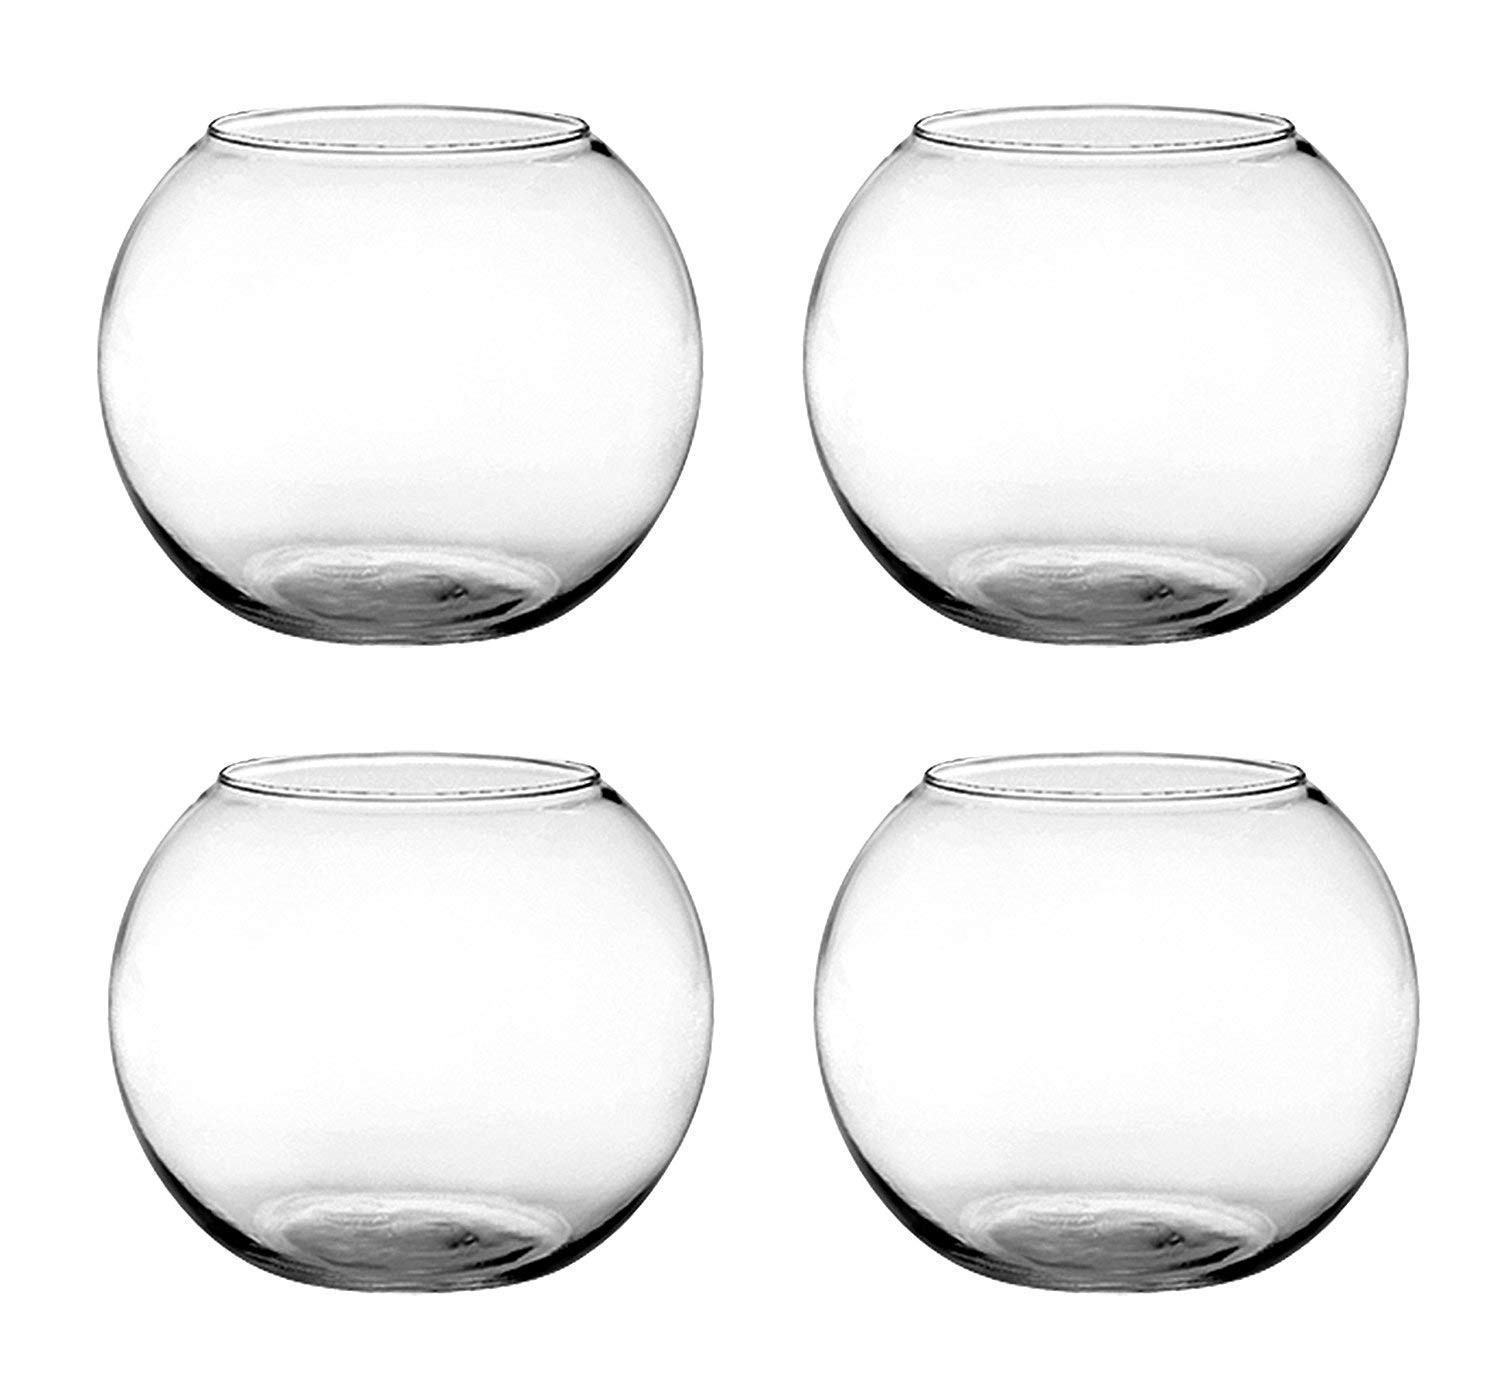 12 Great 6 Inch Vase Centerpieces 2024 free download 6 inch vase centerpieces of amazon com floral supply online set of 4 6 rose bowls glass for amazon com floral supply online set of 4 6 rose bowls glass round vases for weddings events decora